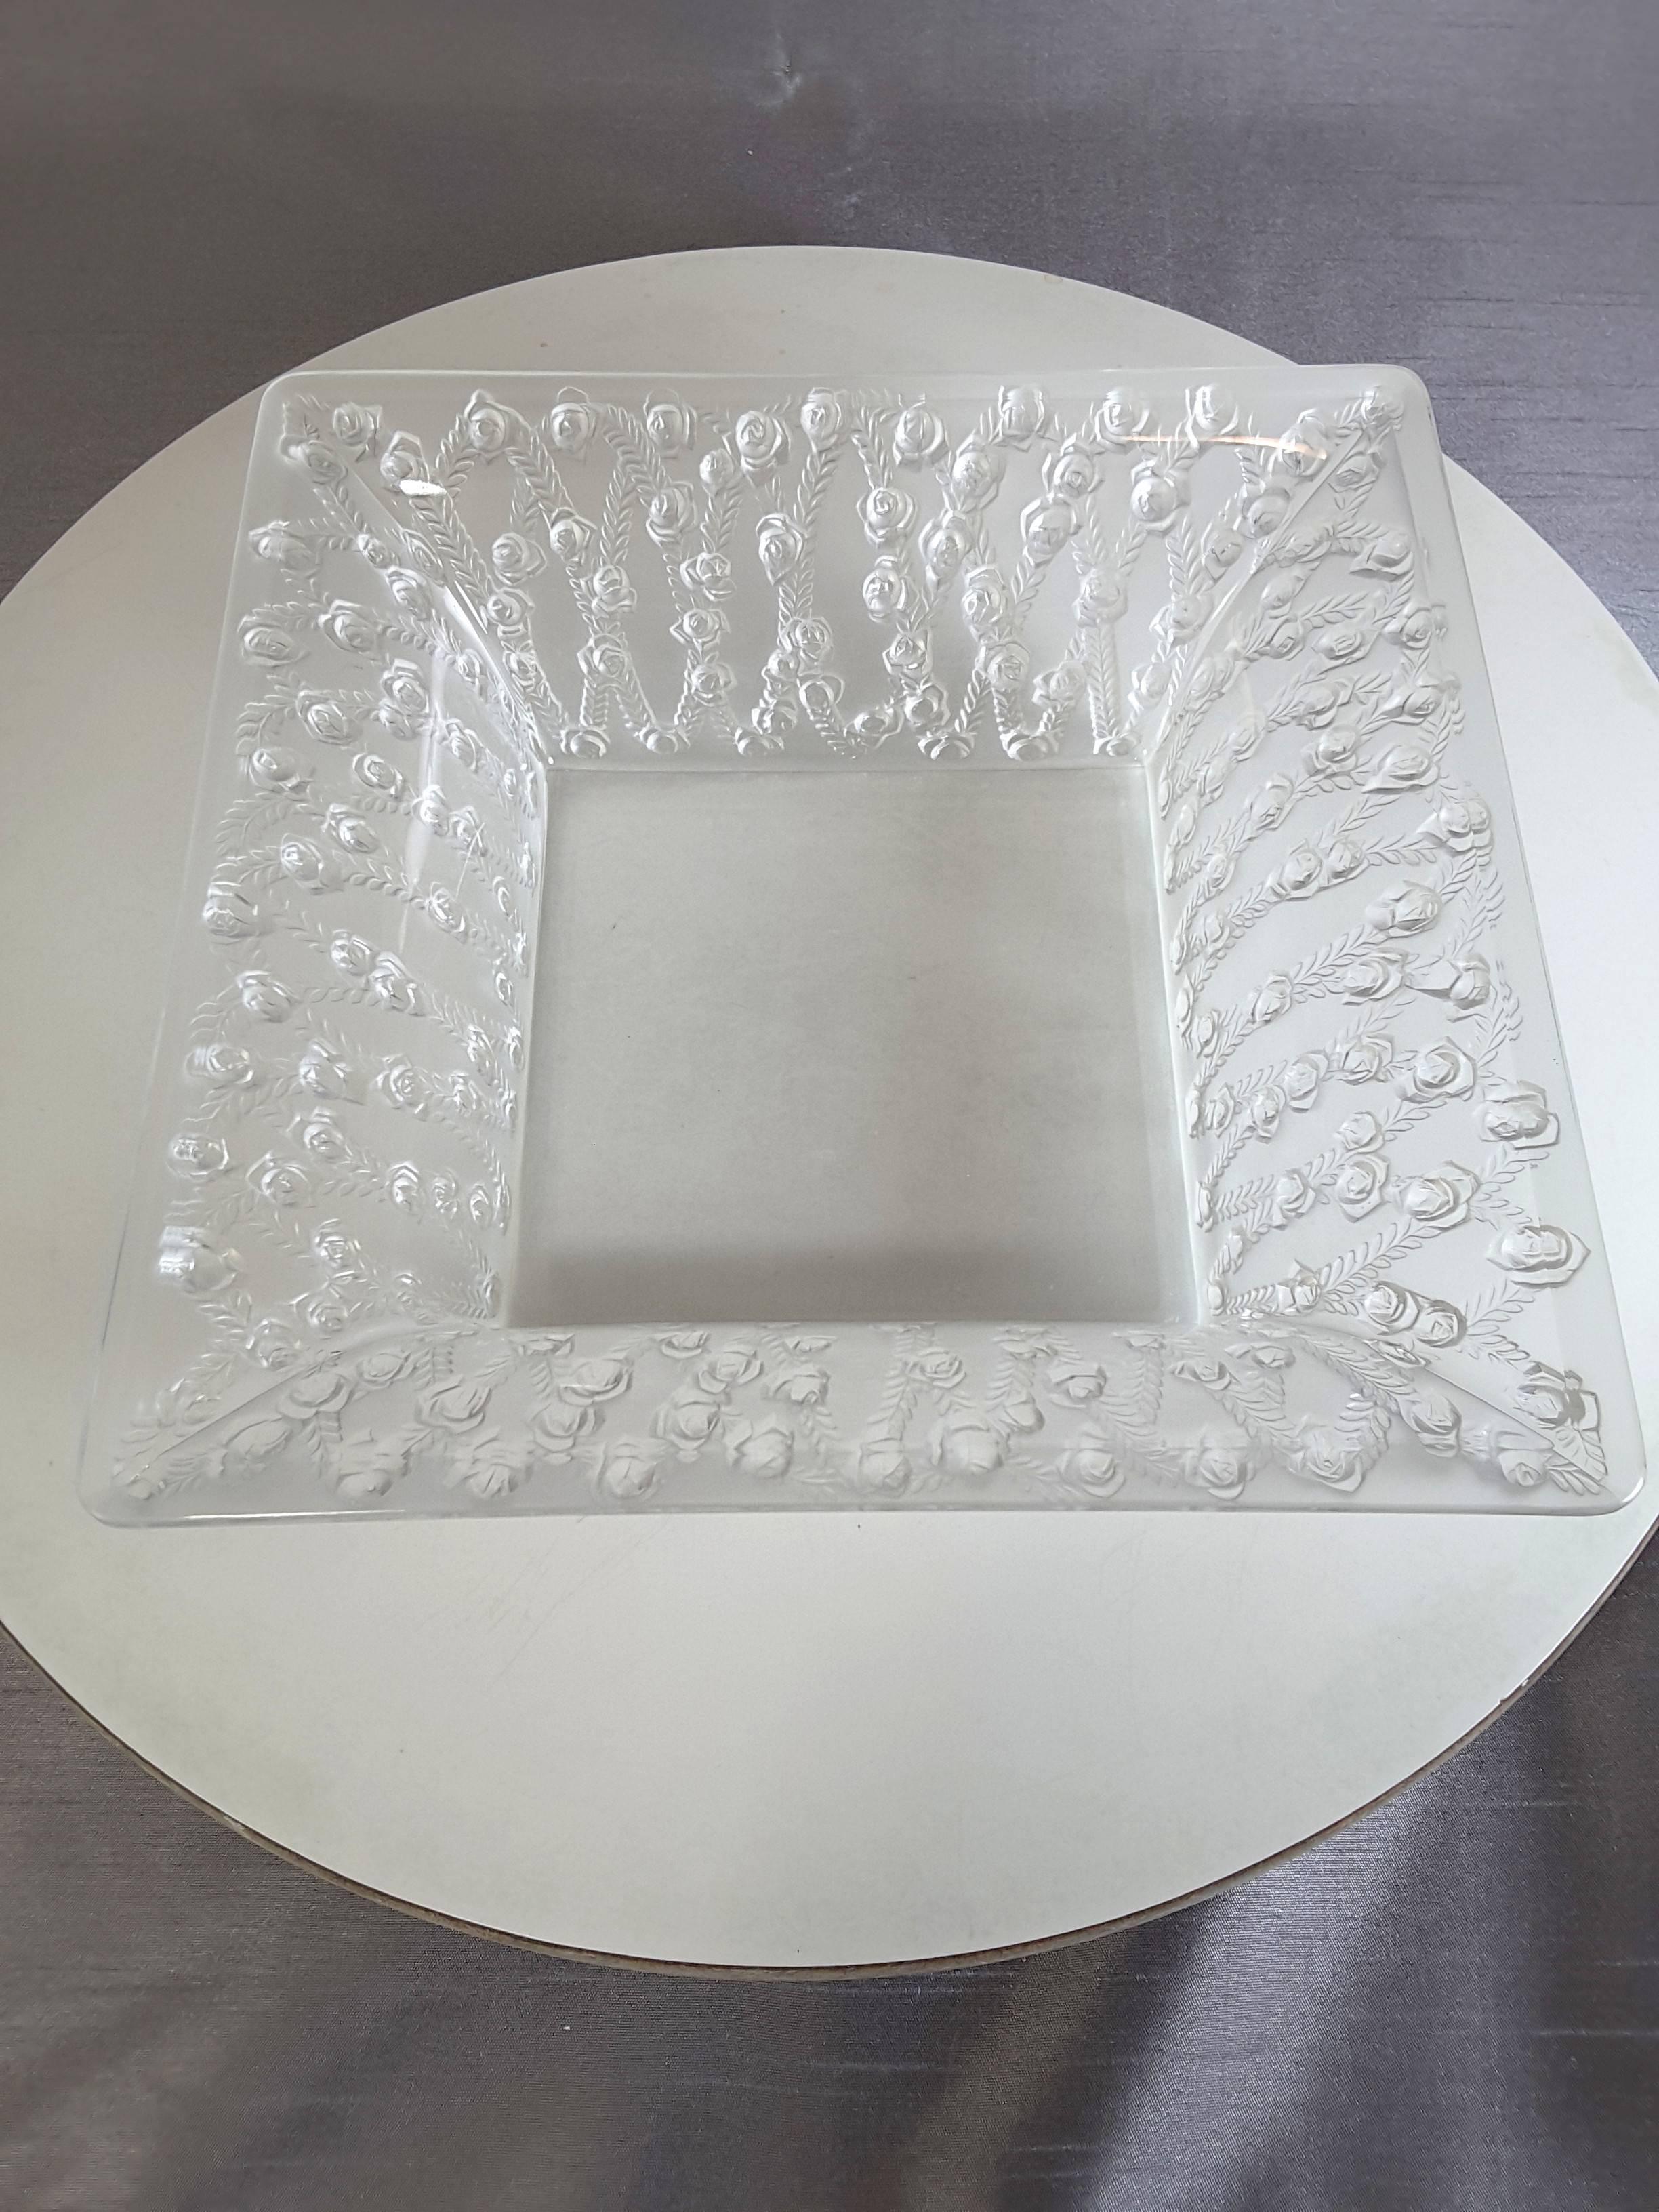 Lalique clear crystal roses bowl, designed in 1939, the square bowl has a multitude of open roses with vines intertwining, coming up on a flared base to top. The bowl is wheel cut signed Lalique, France on the bottom. 
The bowl measures 9